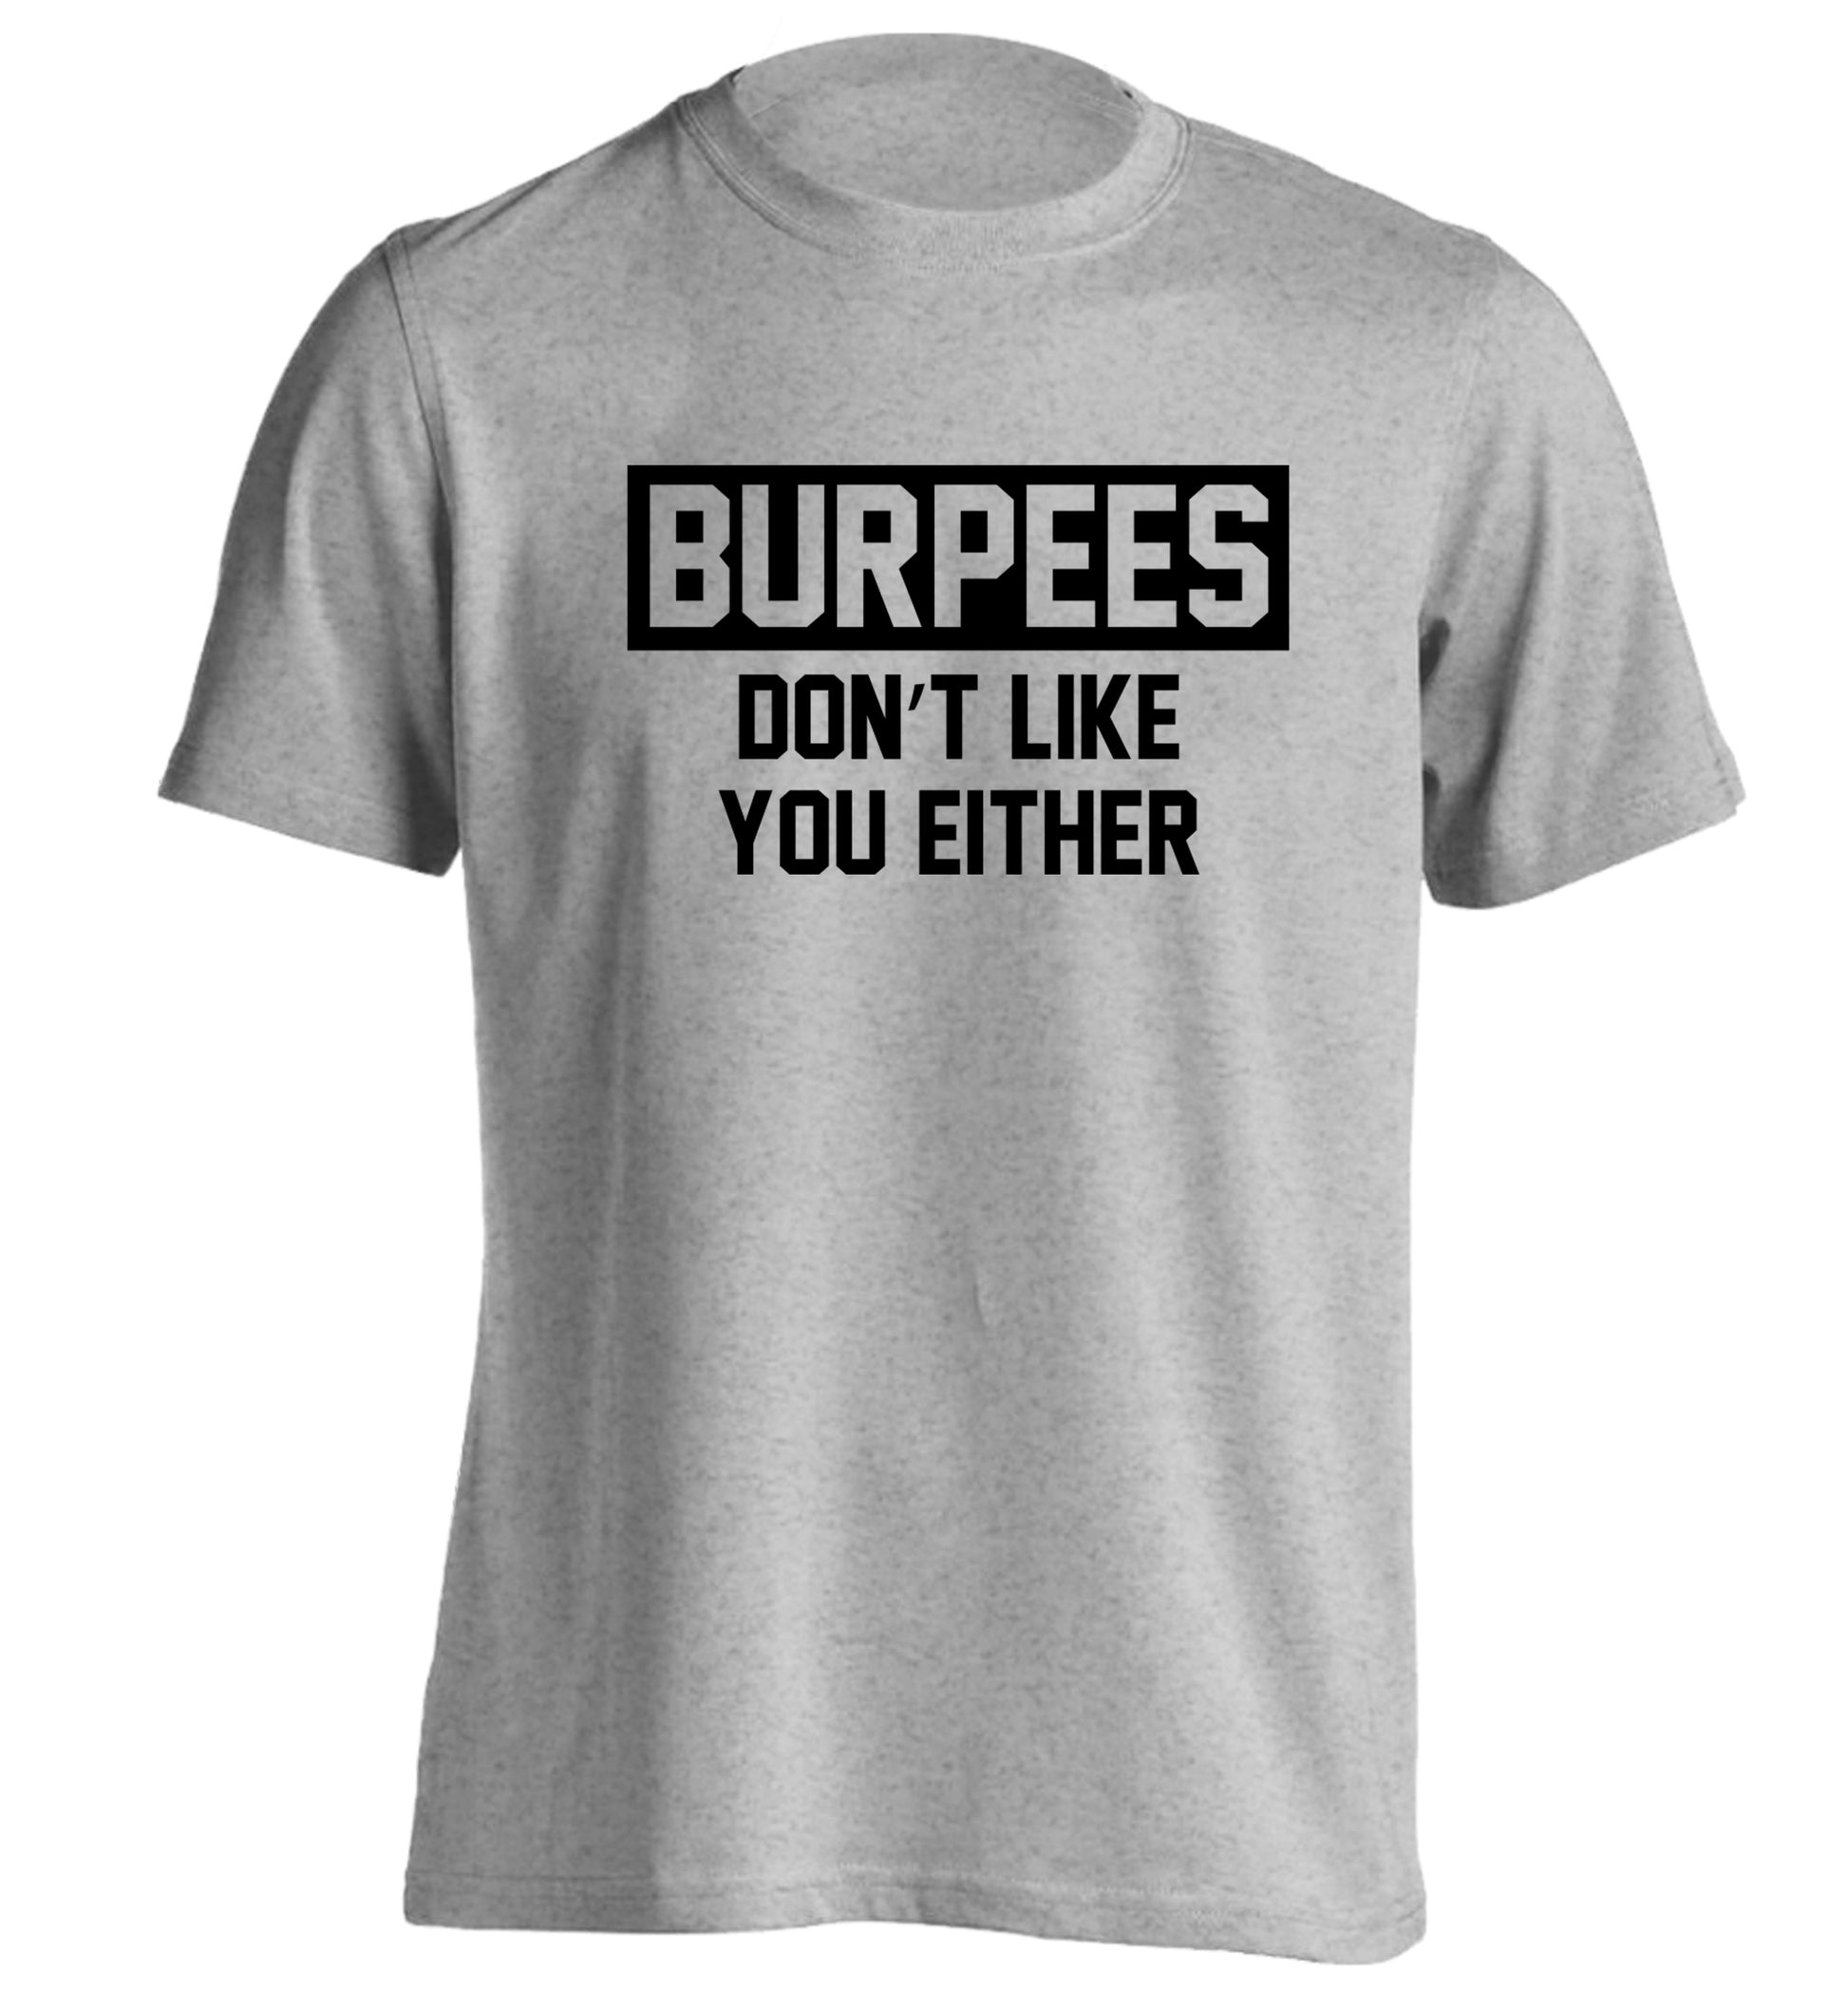 Burpees don't like you either adults unisex grey Tshirt 2XL